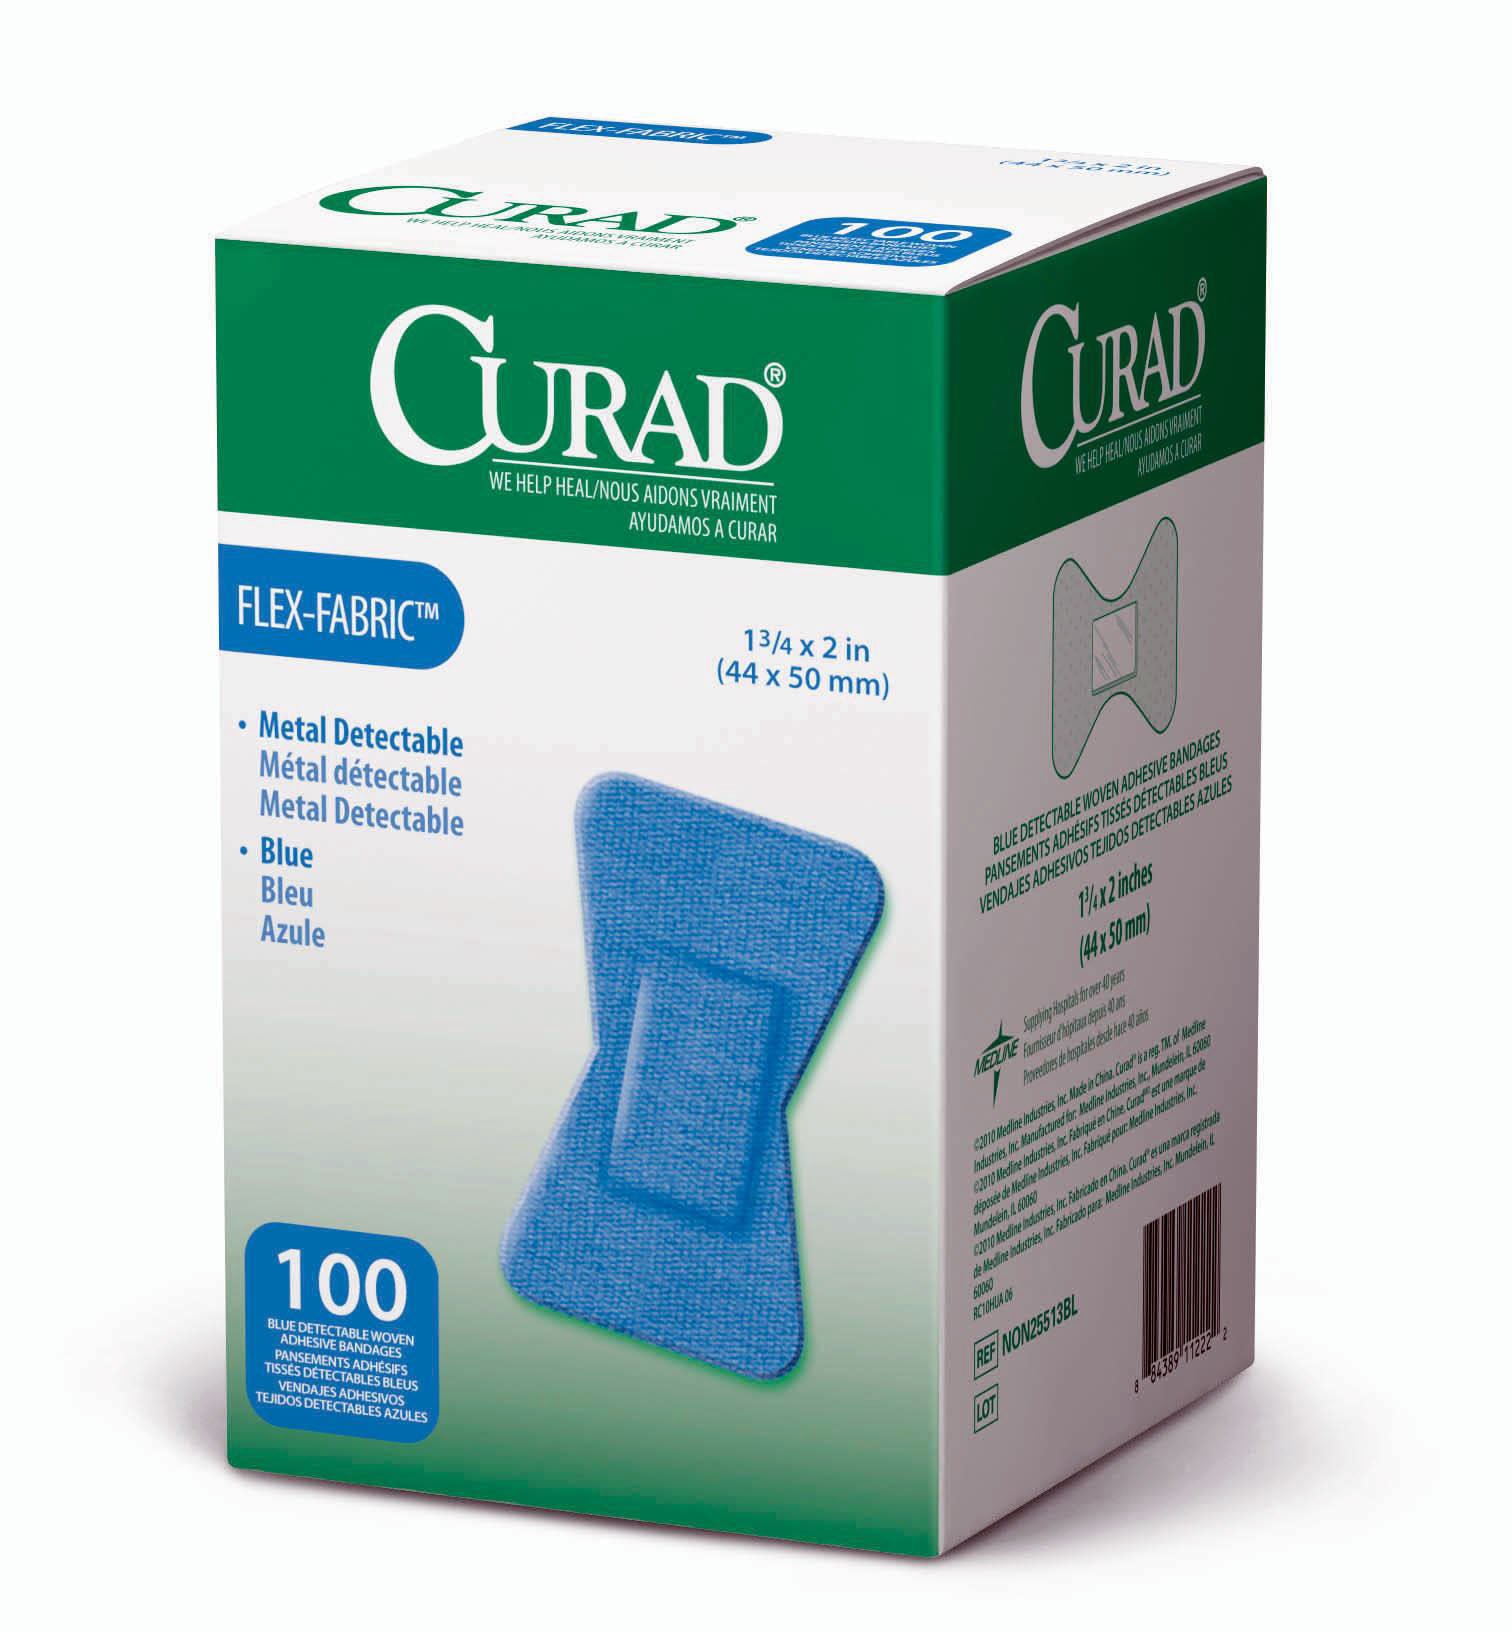 Curad Fingertip Adhesive Bandages, Food Service Blue Detectable Bandage, 100 Count,Fingertip 1.75" x 2" (Packaging may vary)